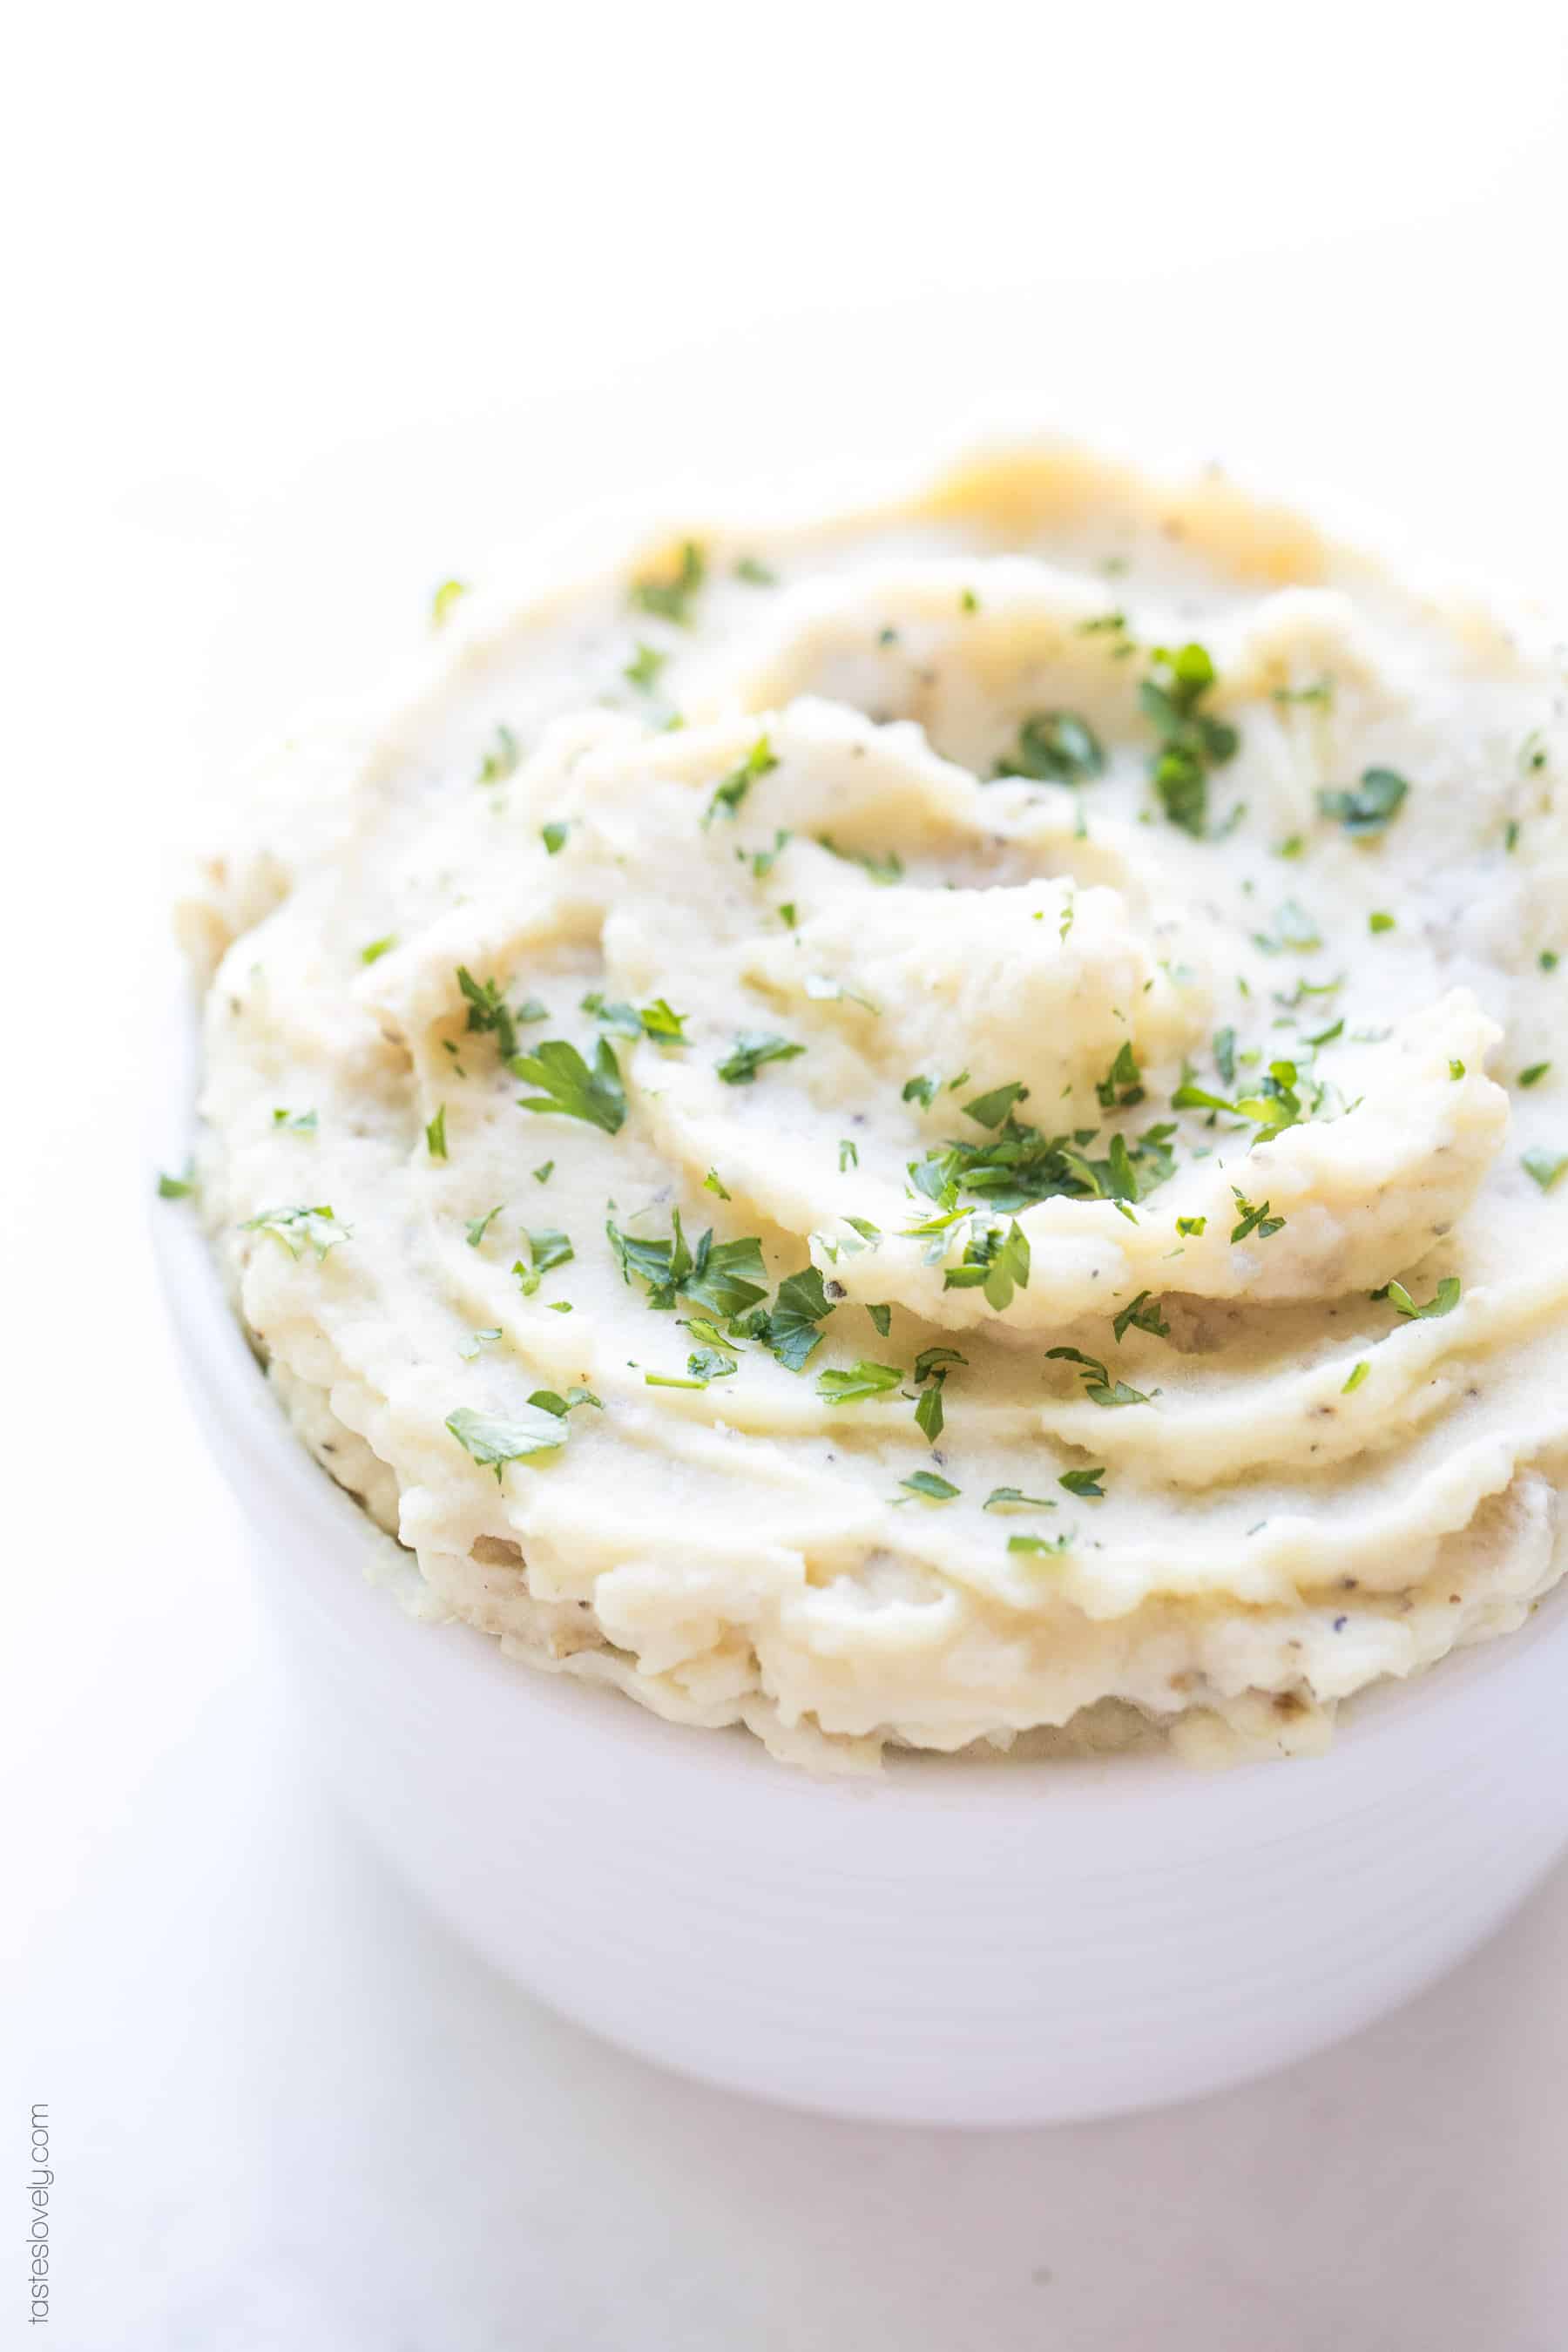 Mashed potatoes in a bowl